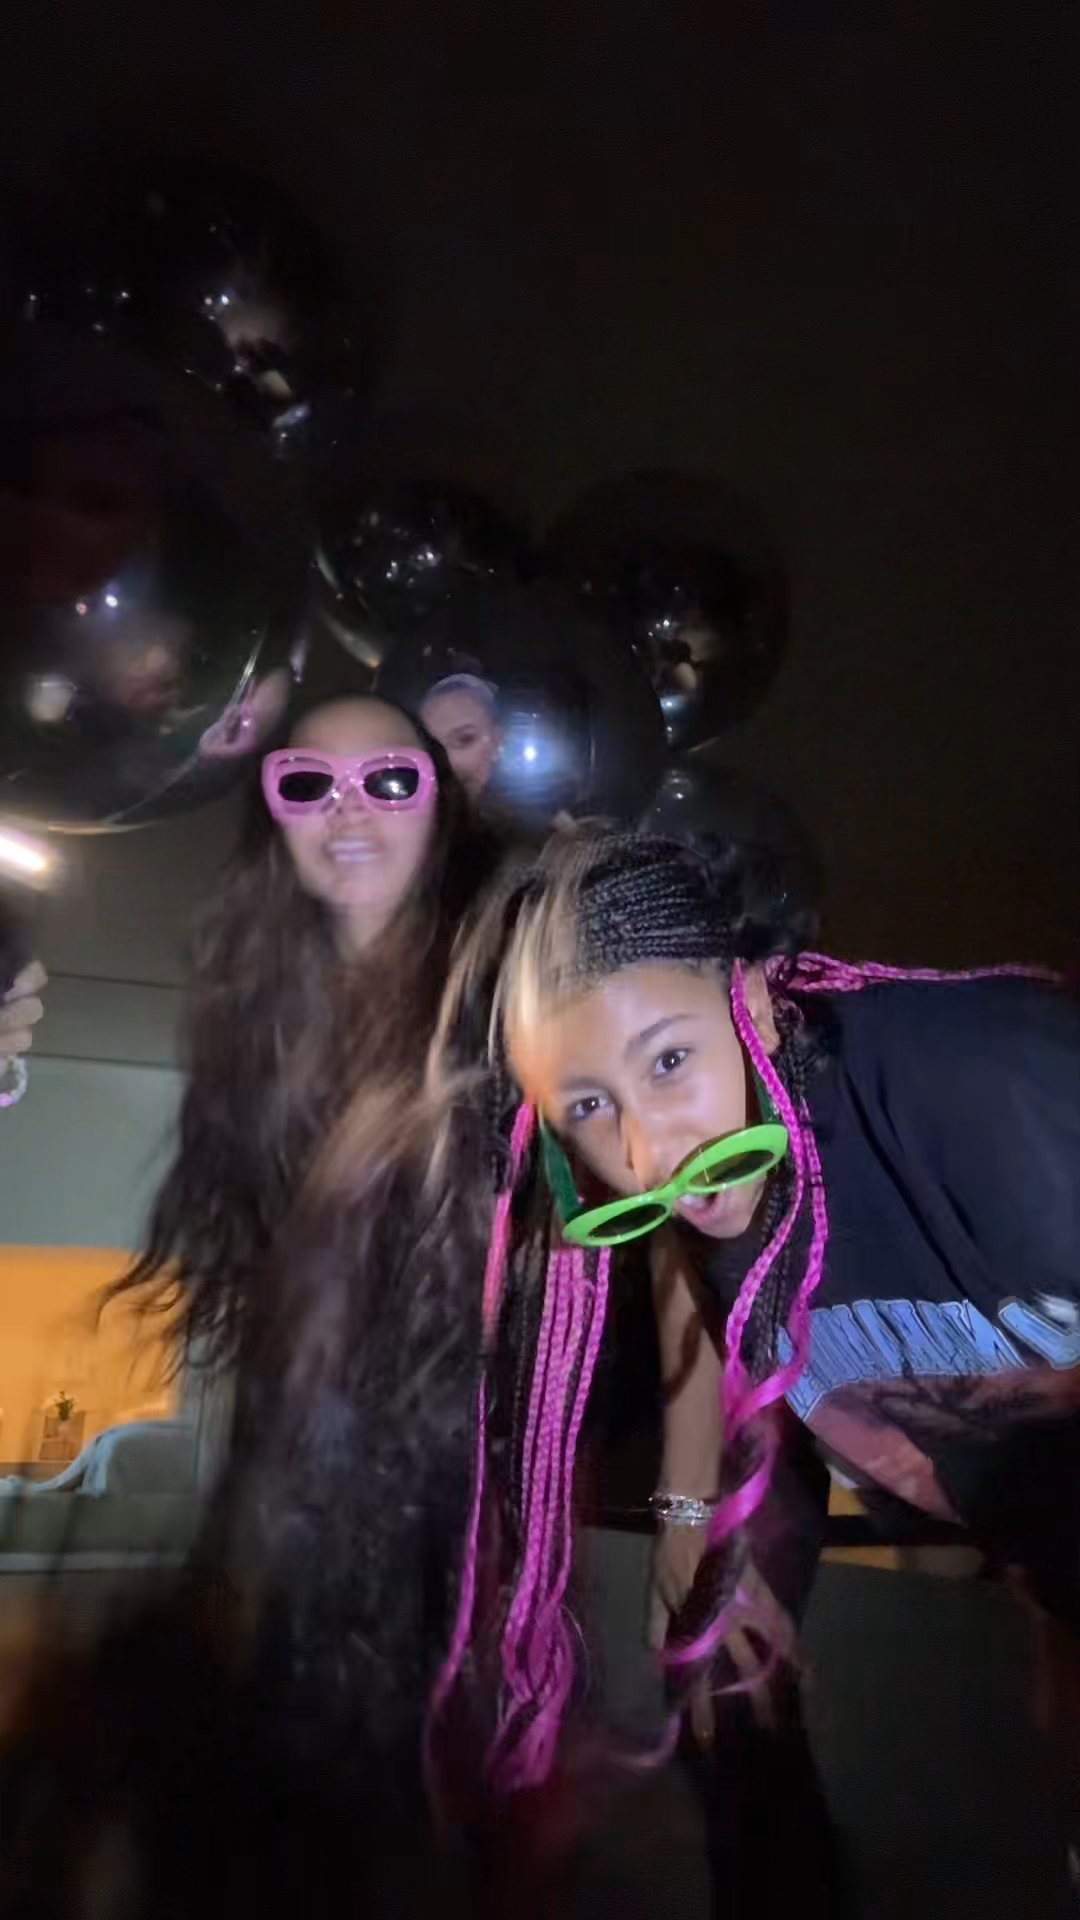 Kim and her BFF, La La Anthony, also appeared in the clip, which was posted to TikTok